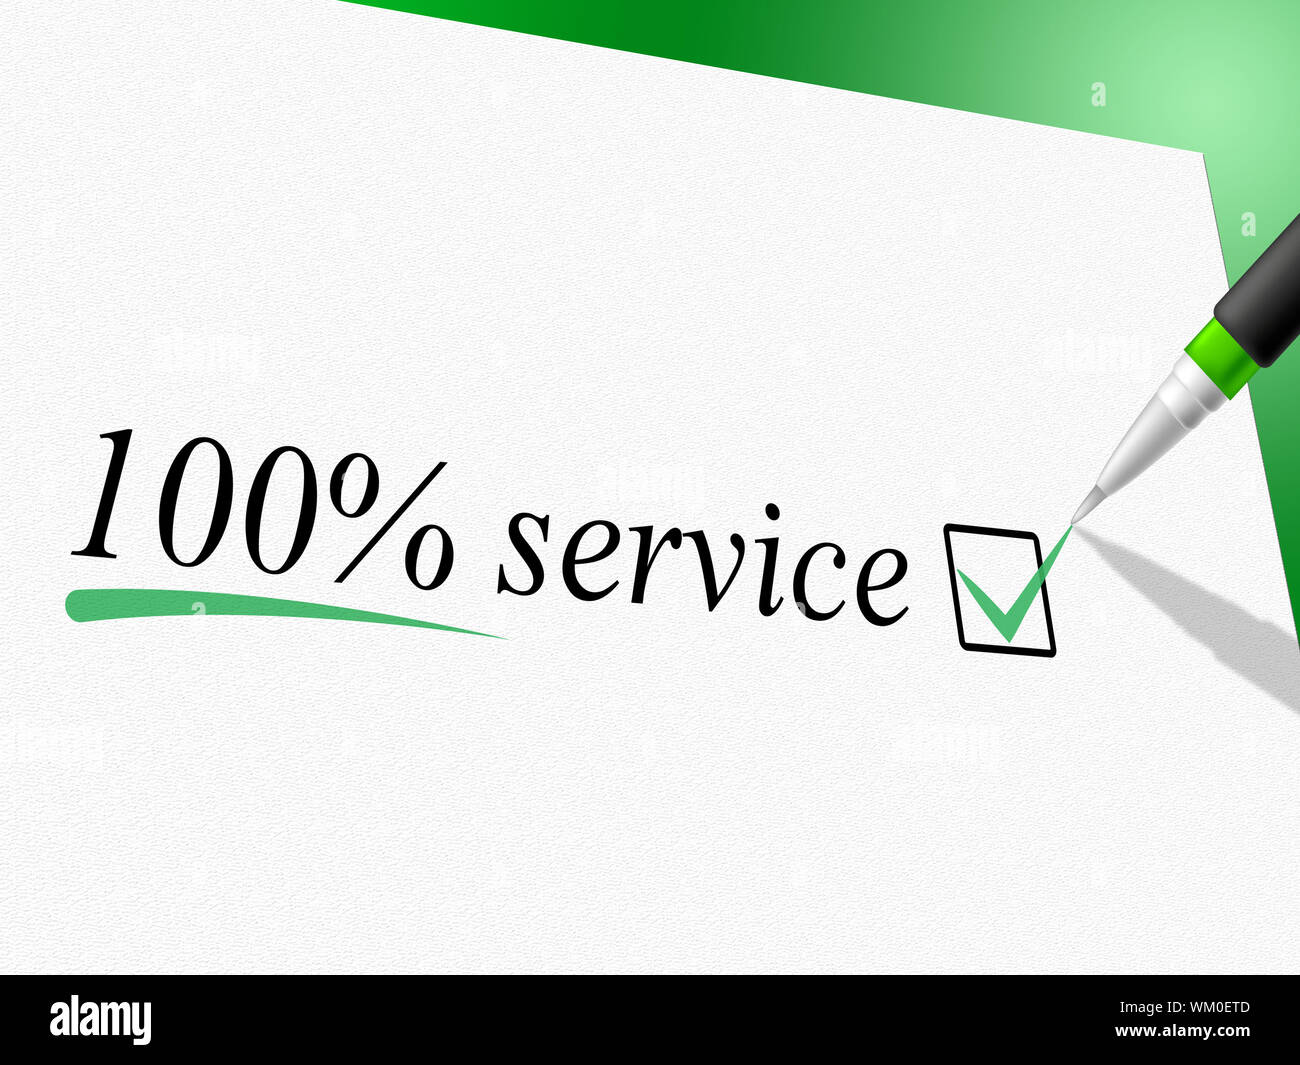 Hundred Percent Service Meaning Help Desk And Services Stock Photo